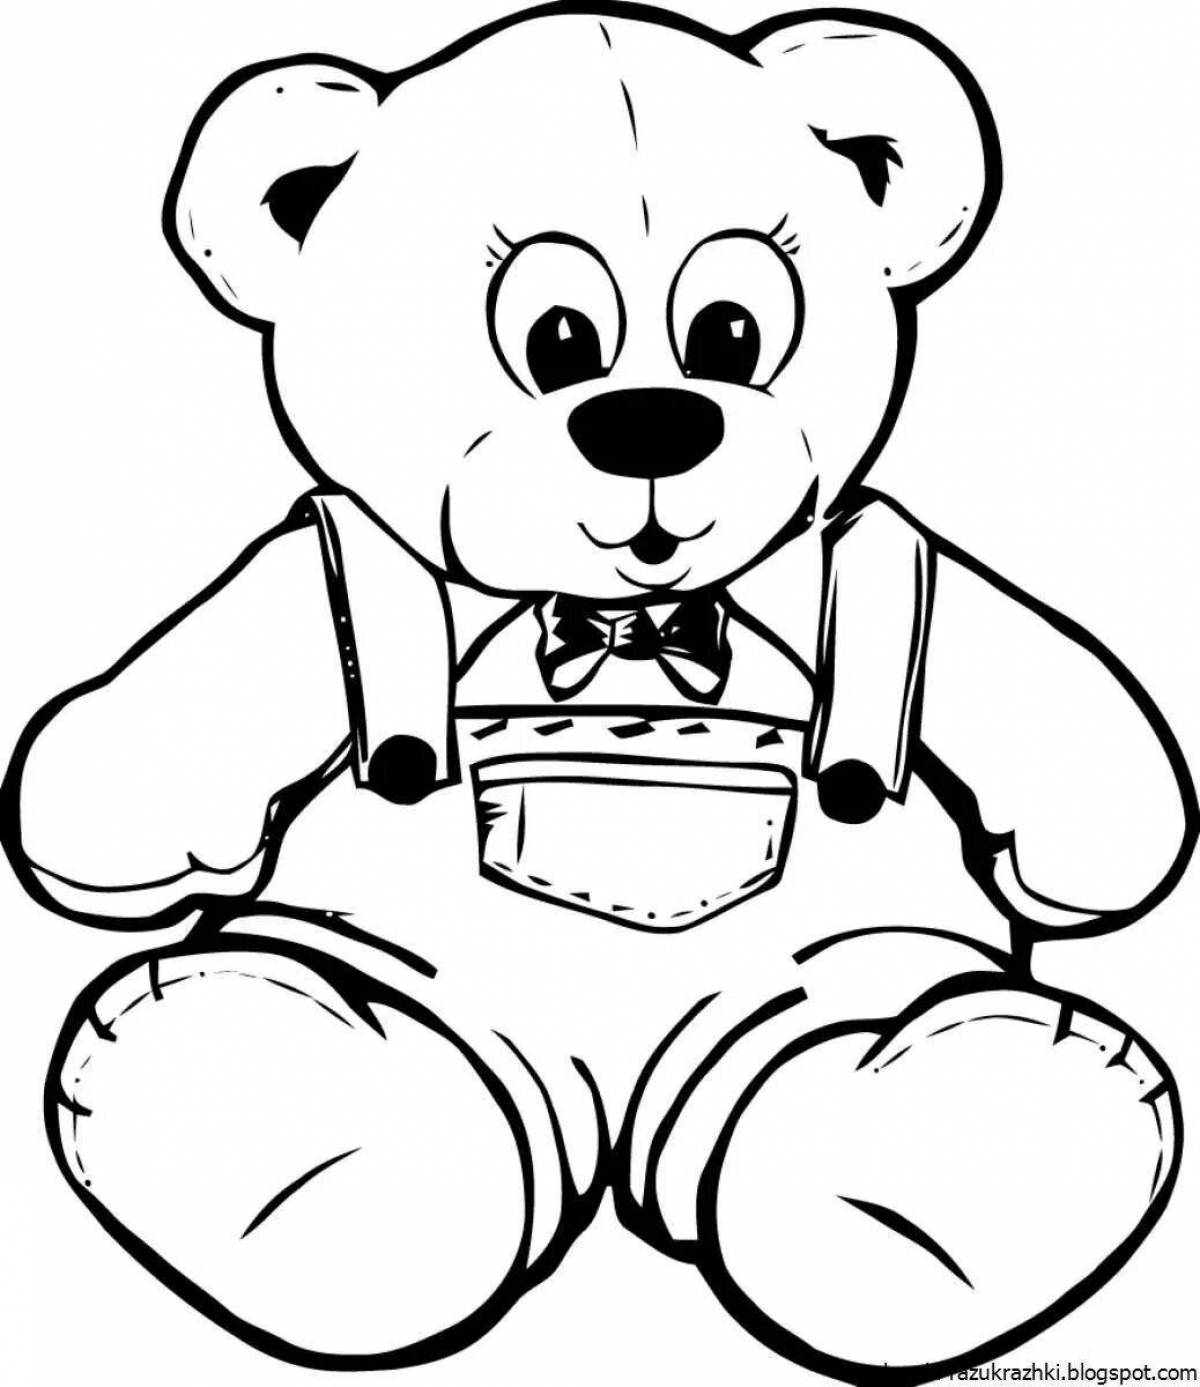 Glitter teddy bear coloring pages for kids